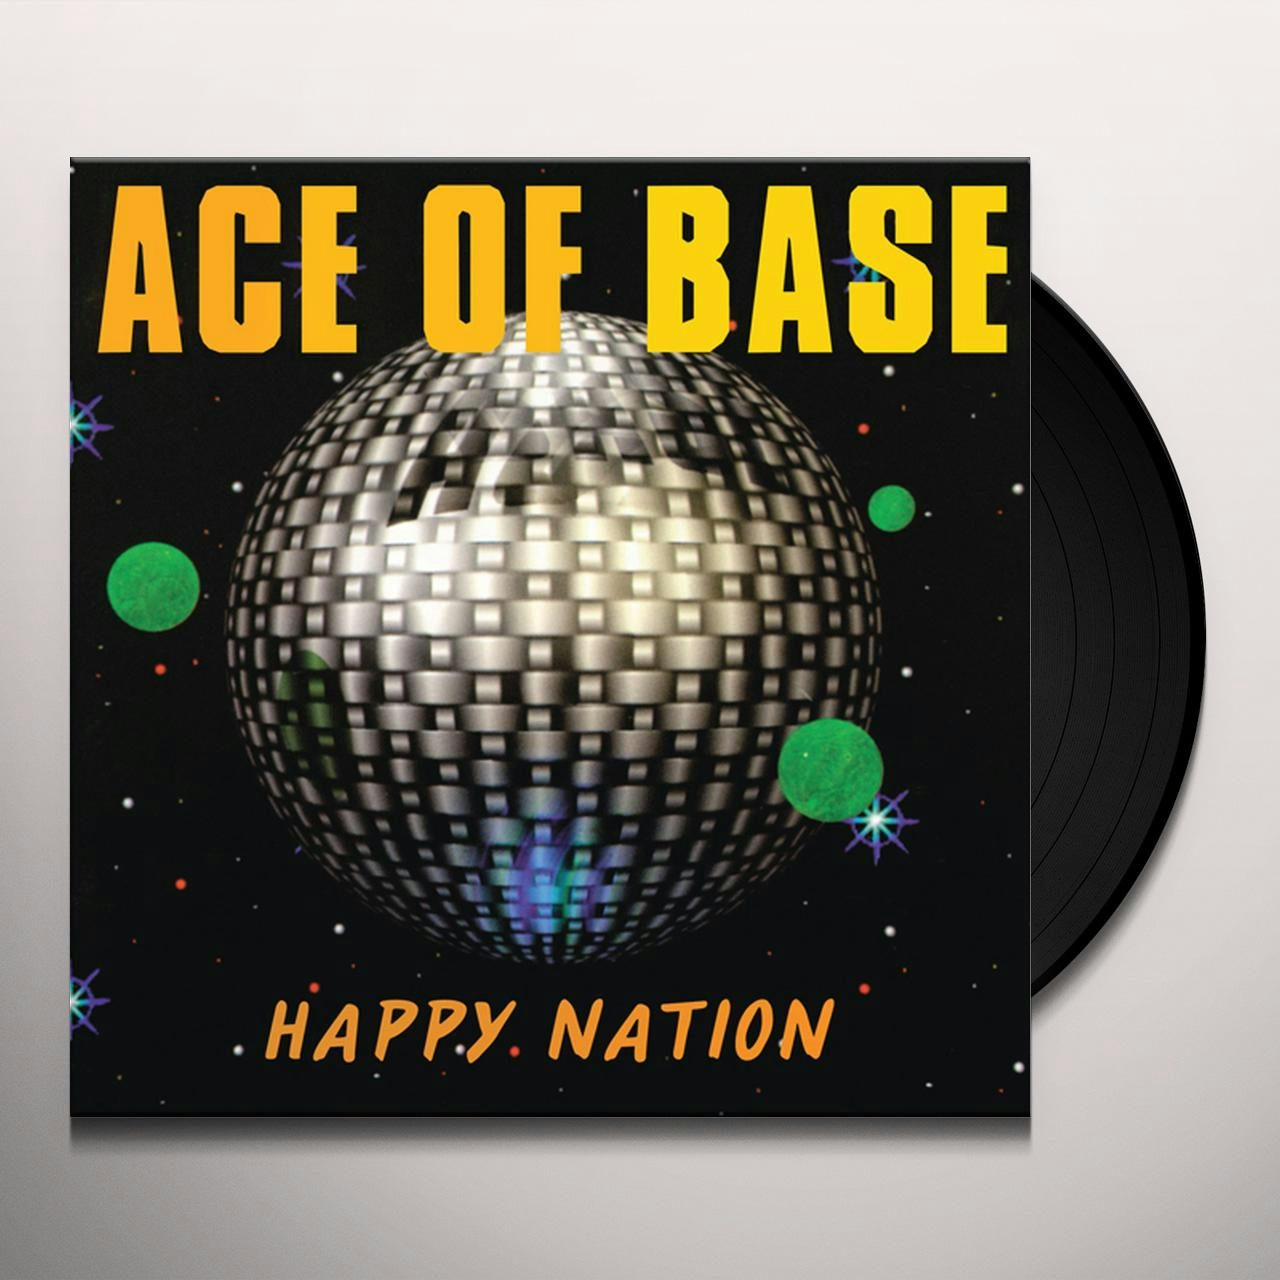 Happy nation remix fred